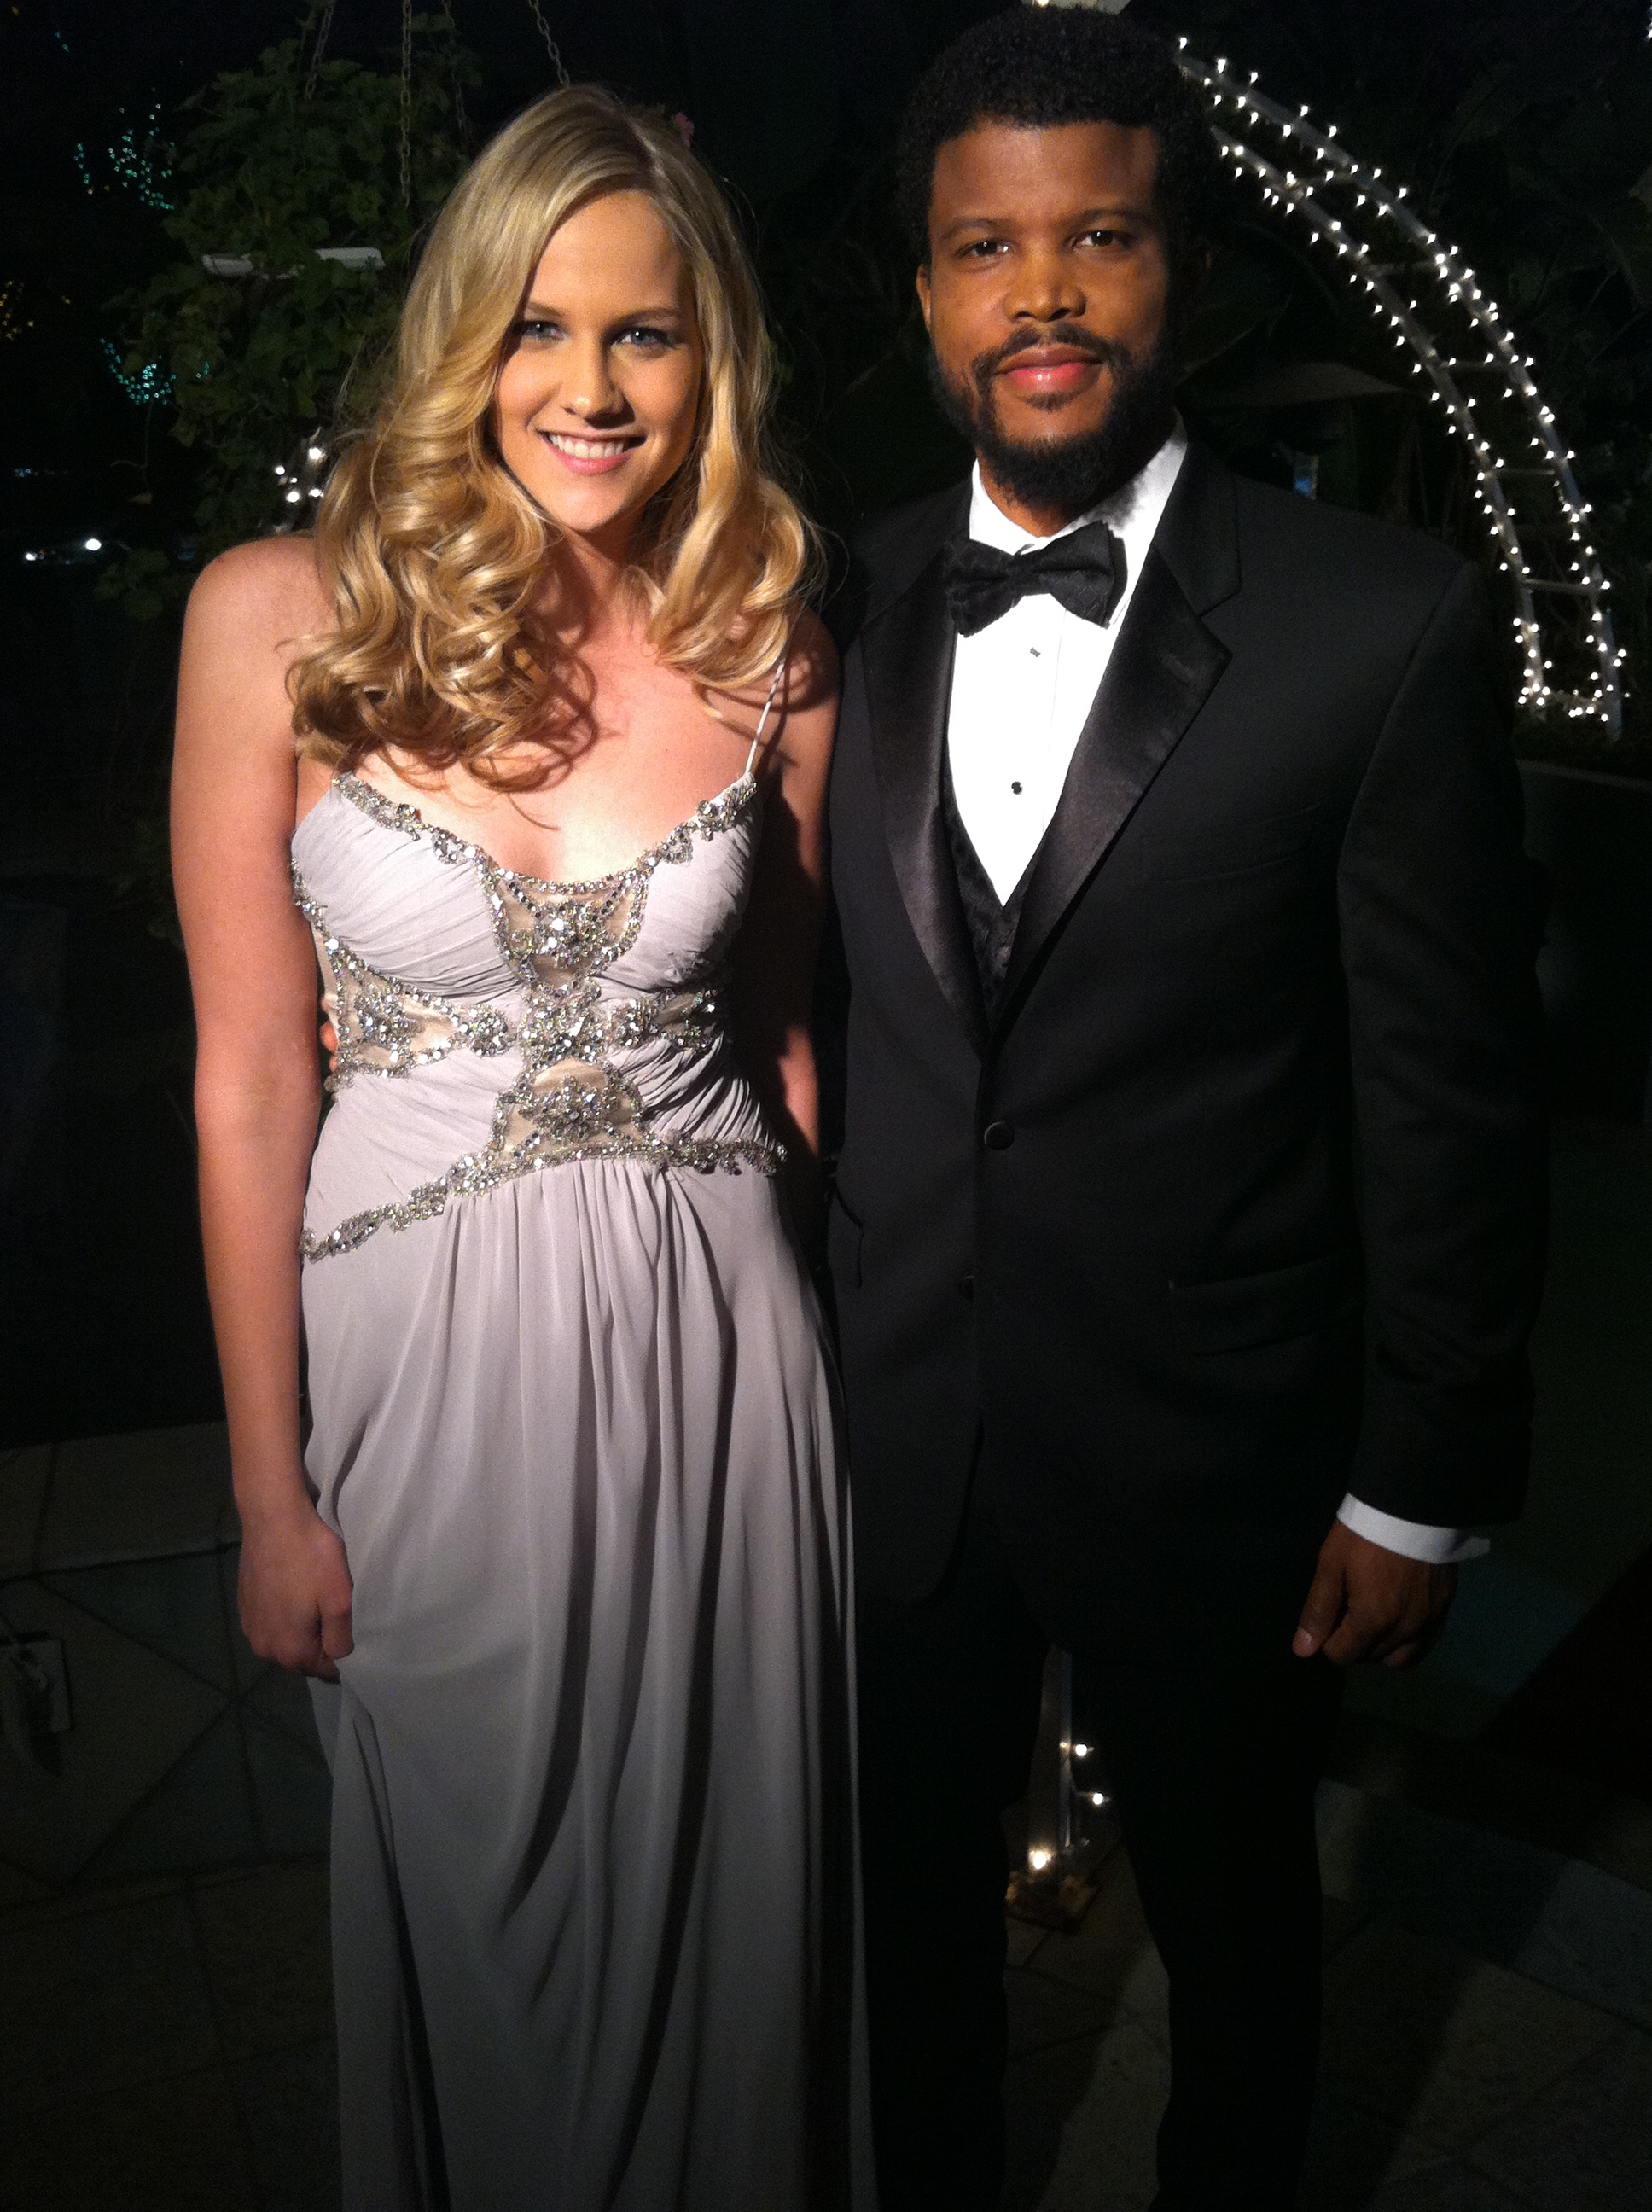 Evy Baehr (L) and Sharif Atkins at the 2013 Movieguide Awards